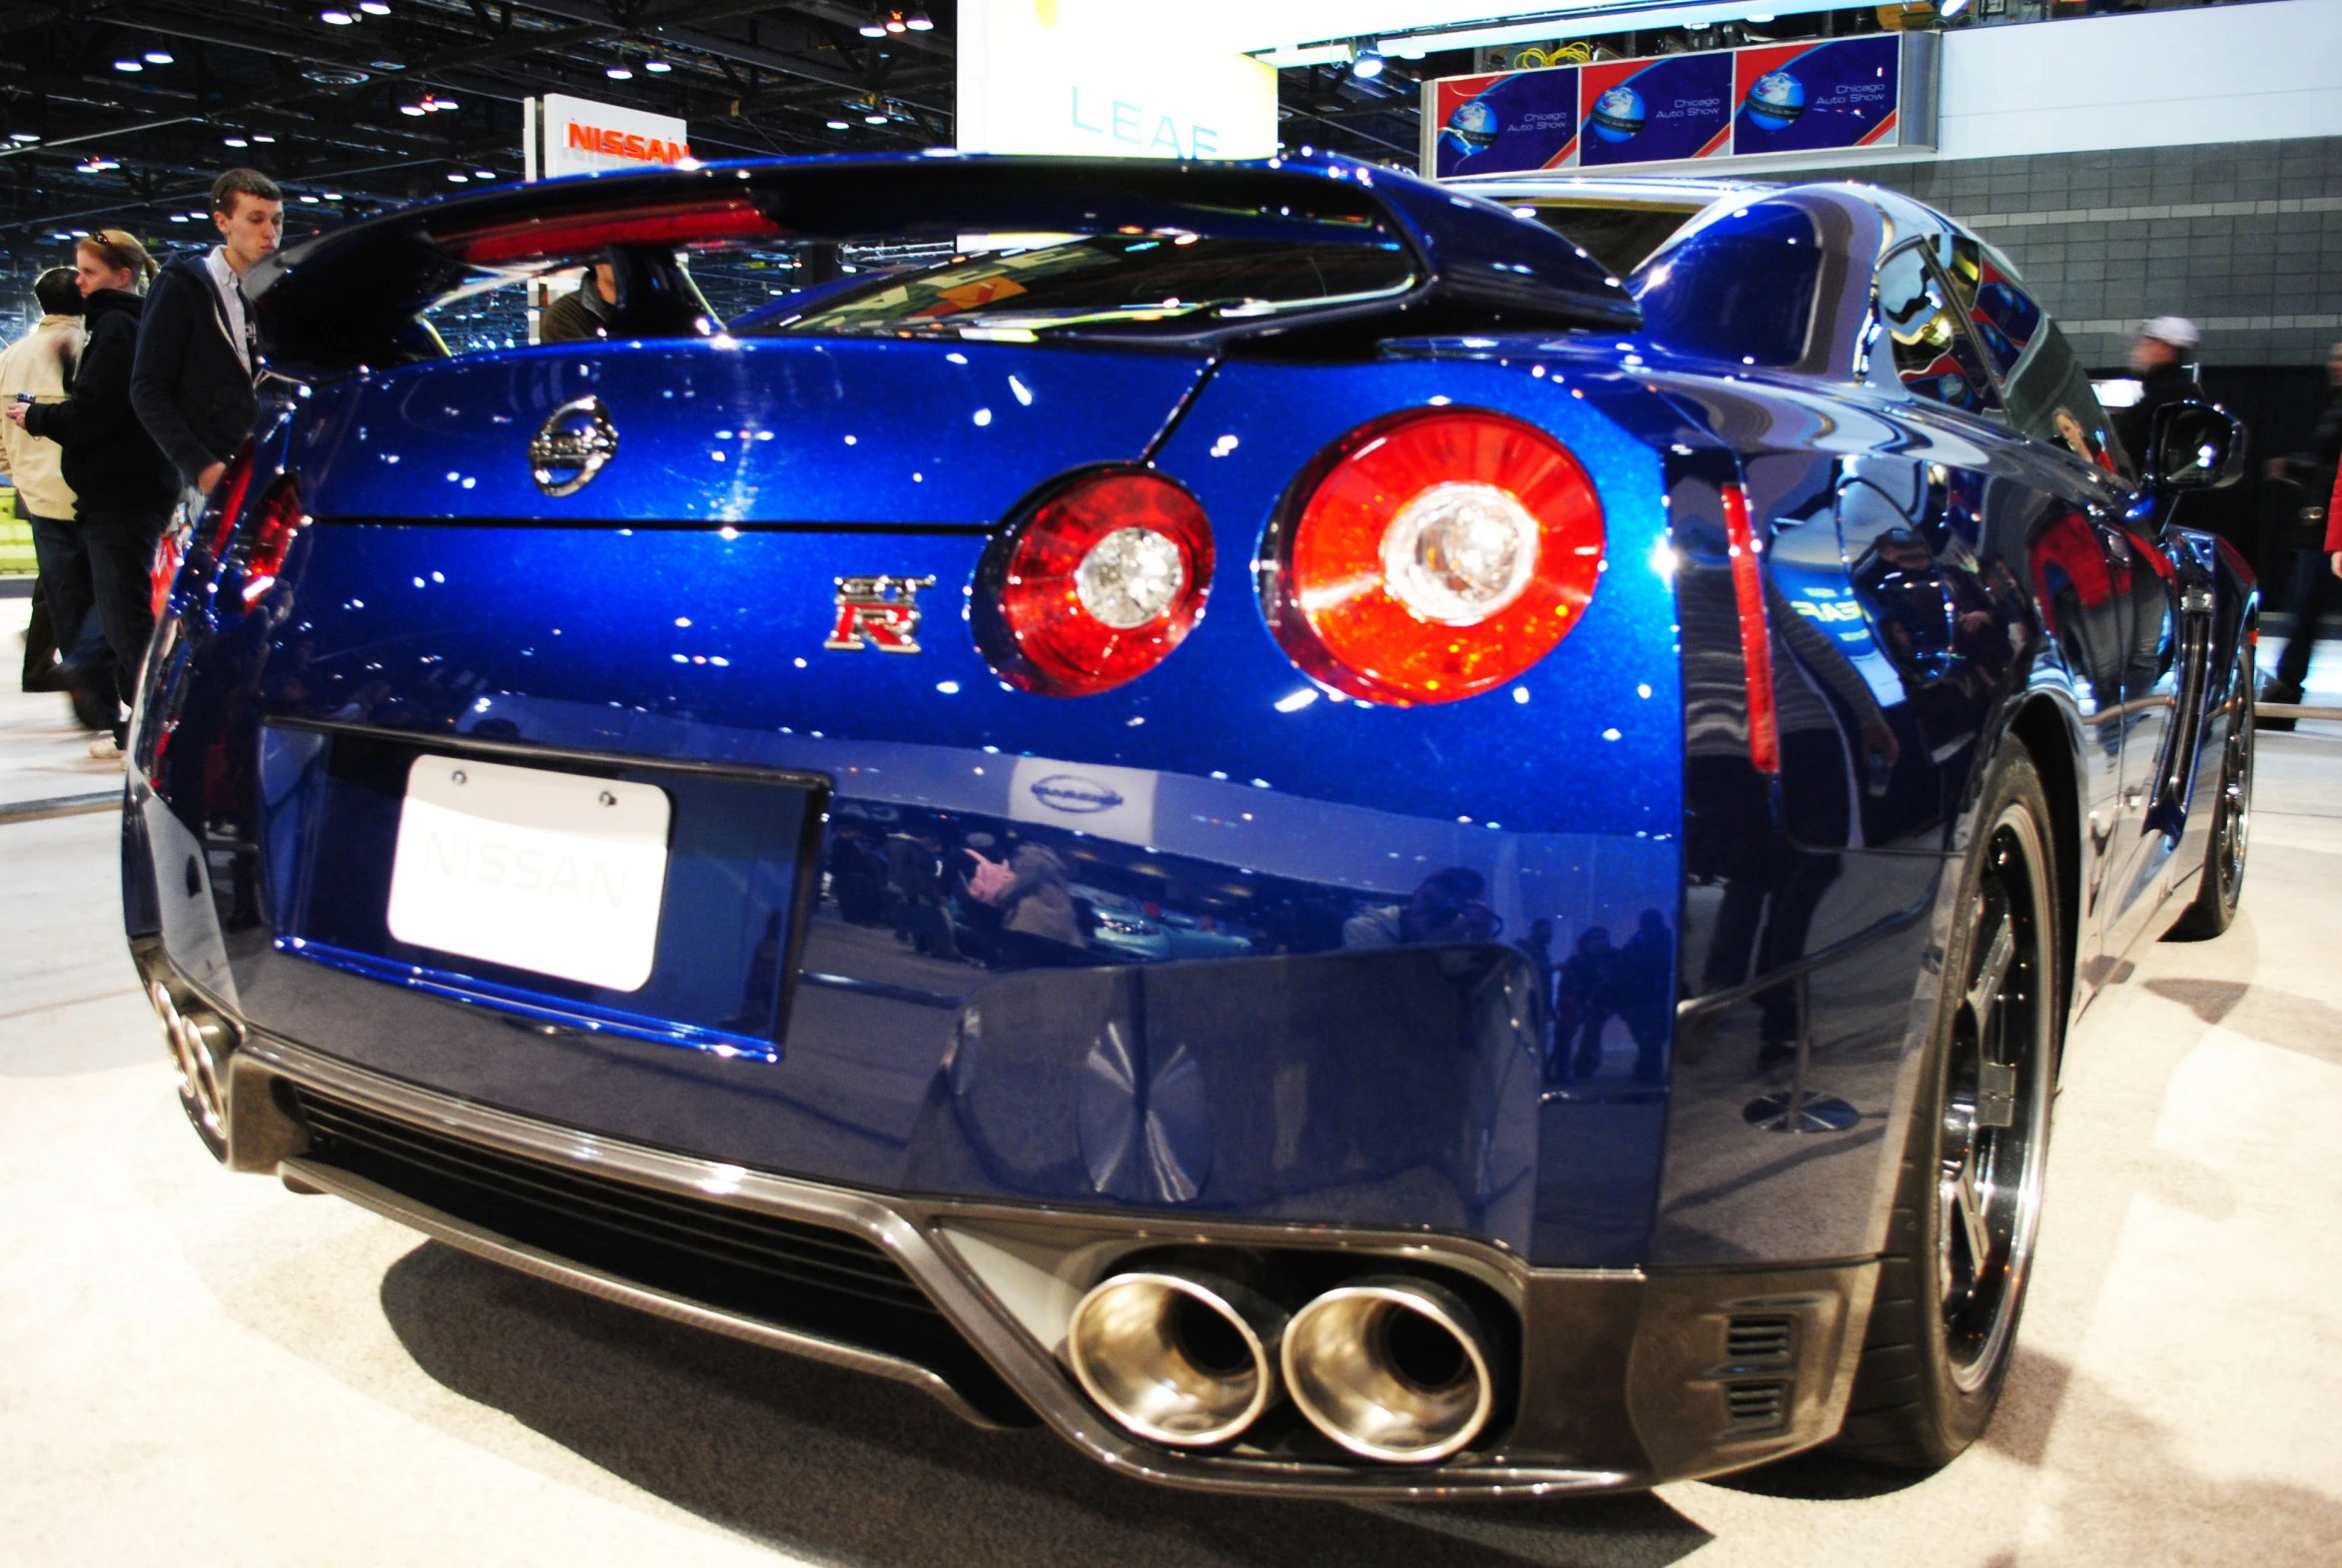 the rear end of a shiny blue car on display